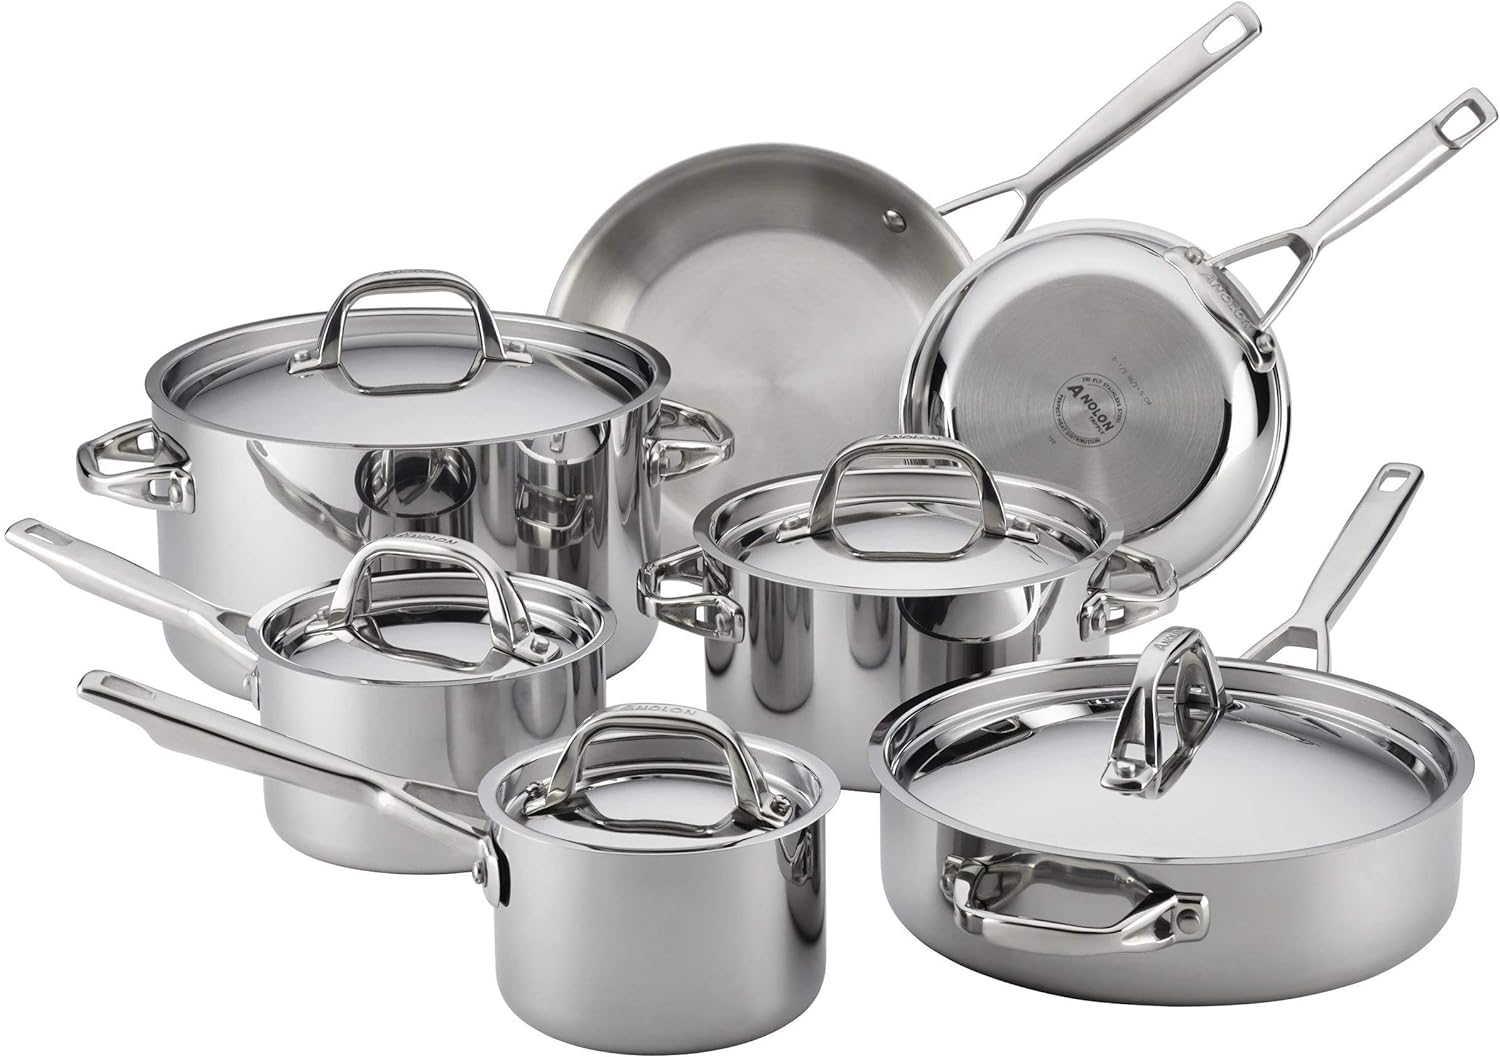 Anolon Triply Clad Stainless Steel Cookware Set